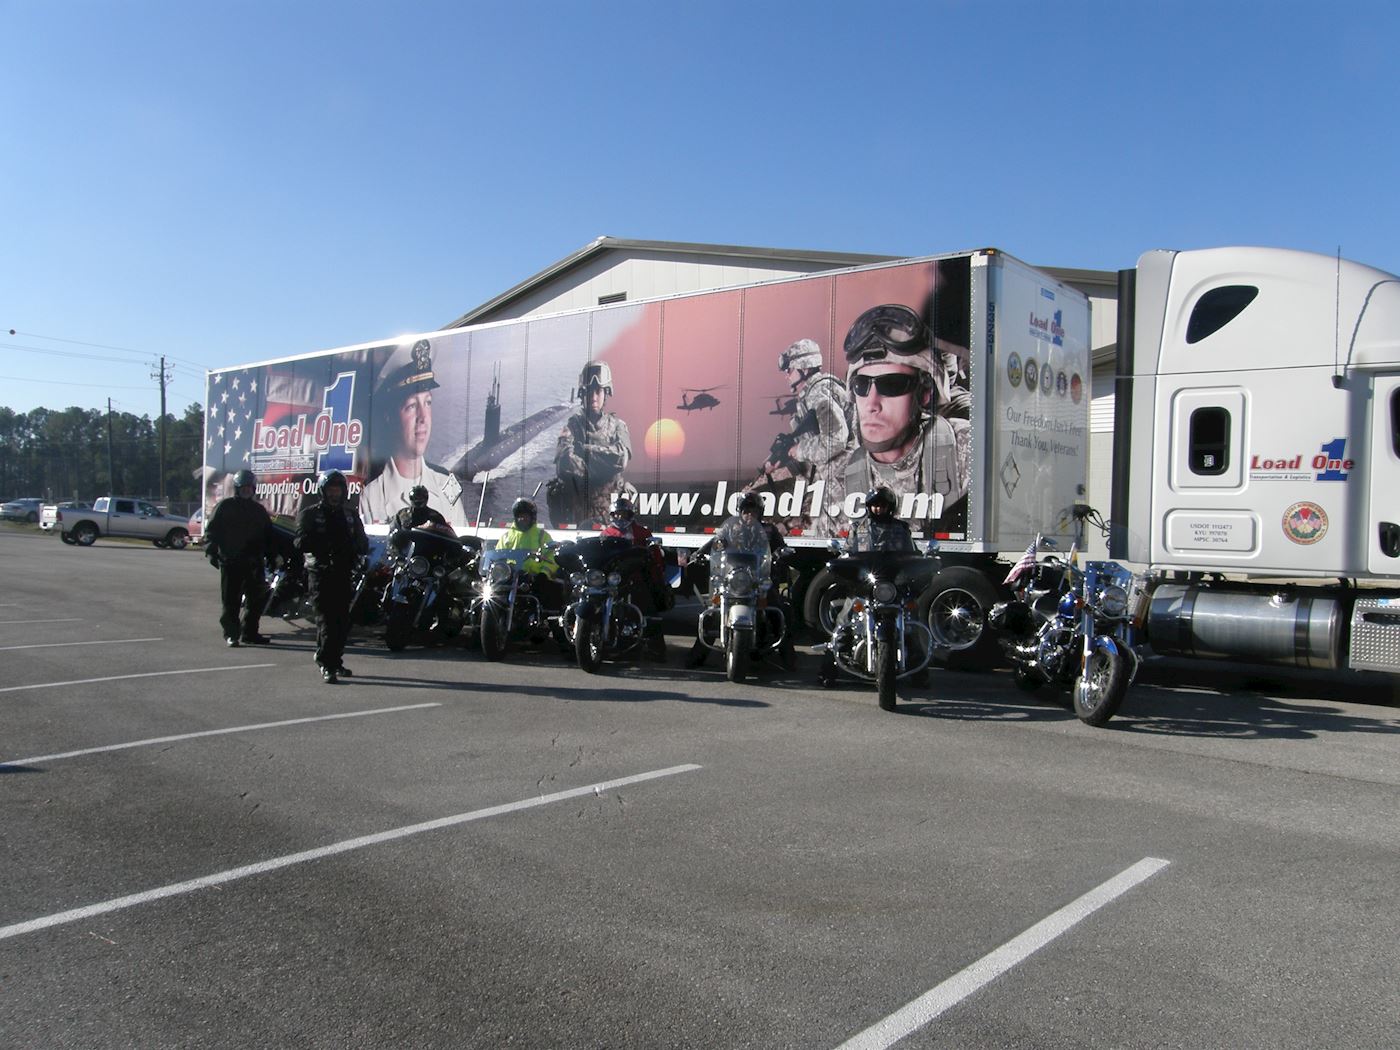 Patriot Guard motorcycle riders usually escort trucks bringing Christmas Wreaths from the Worcester Wreath Company of Harrington, Maine, to Fort McClellan, Ala., for the annual Wreaths Across America Wreath Laying Ceremony. 